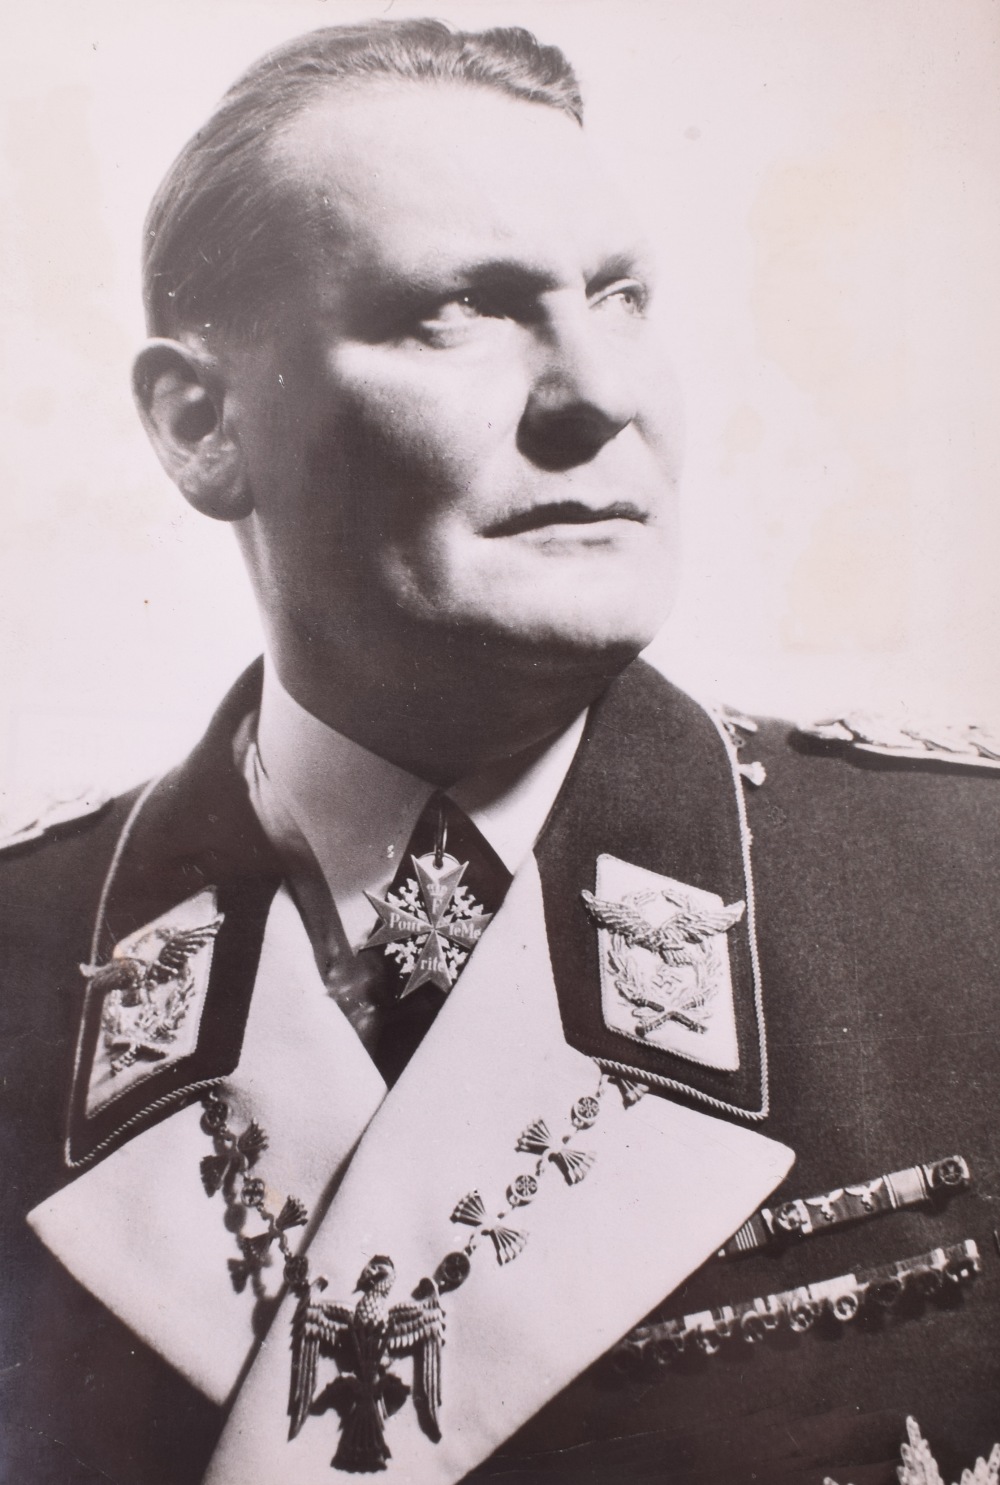 Selection of Photographs of Mostly Personalities of the Third Reich